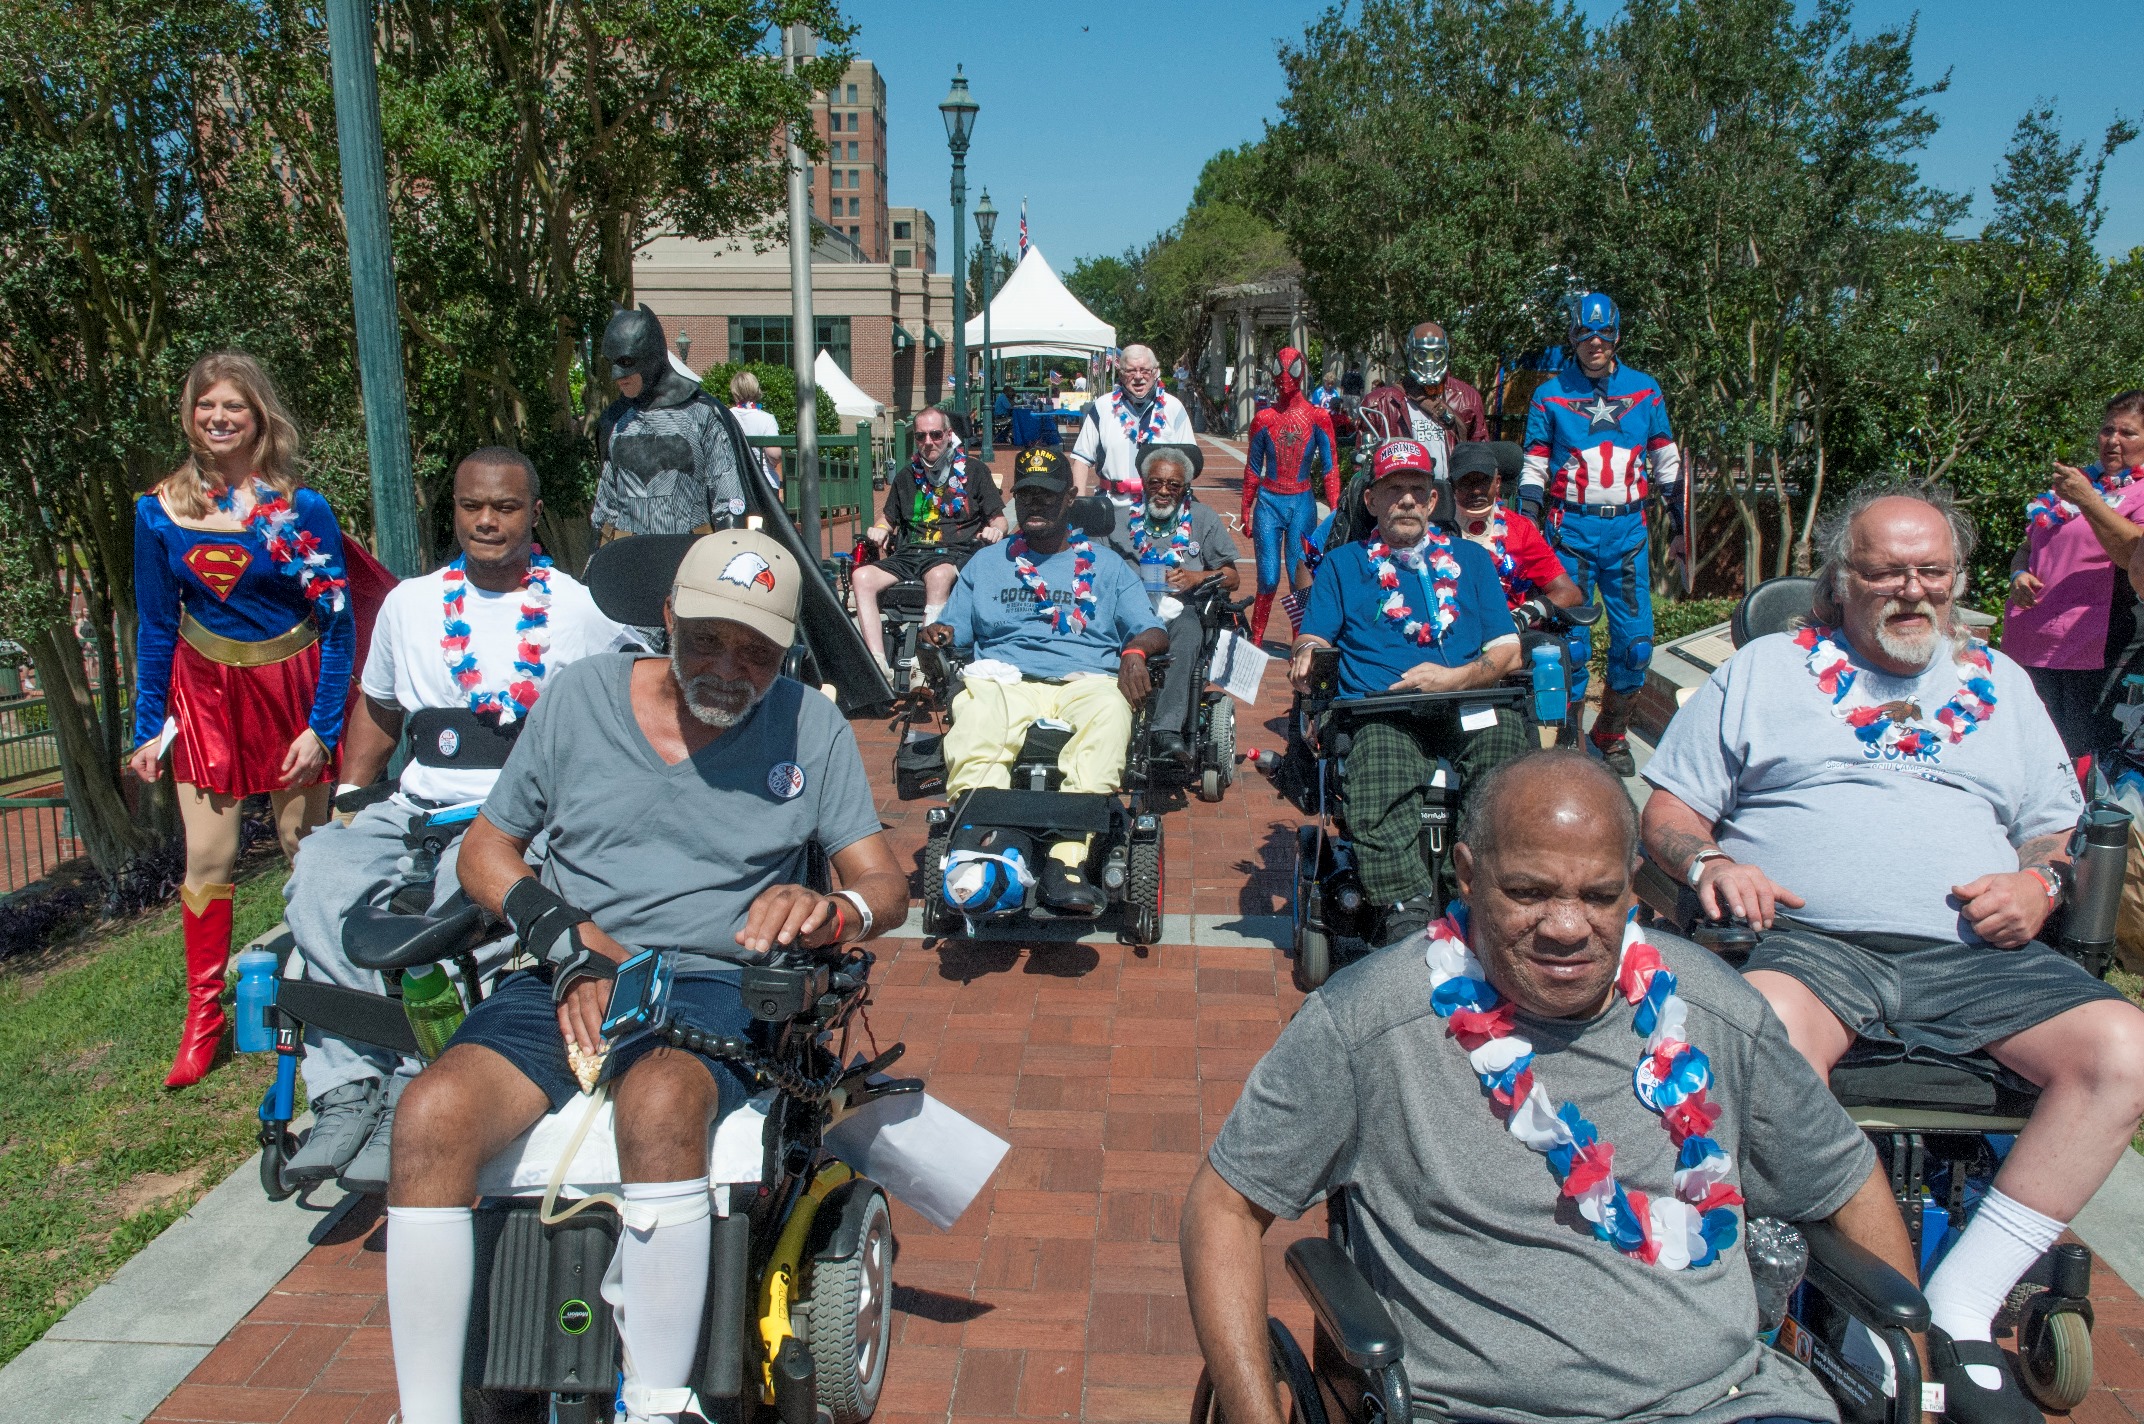 With VA employees dressed in super hero costumes, Veterans at the Charlie Norwood VA Medical Center in Augusta, Ga., participate in the 2017 VA2K Walk & Roll event. The event is held annually VA locations across the country to help promote active lifestyles and help local homeless Veterans.